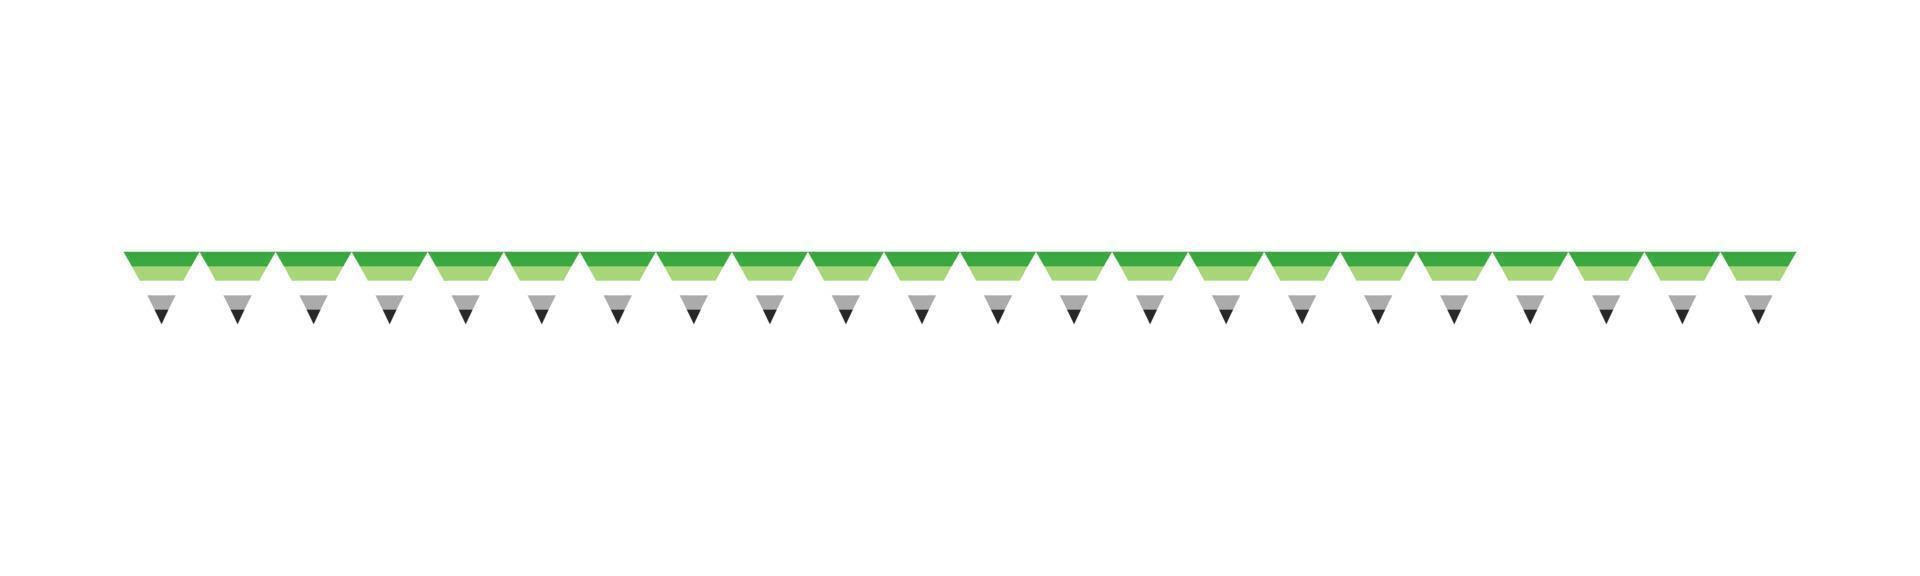 Aromantic Flag Garland. Pride month bunting simple vector graphics.